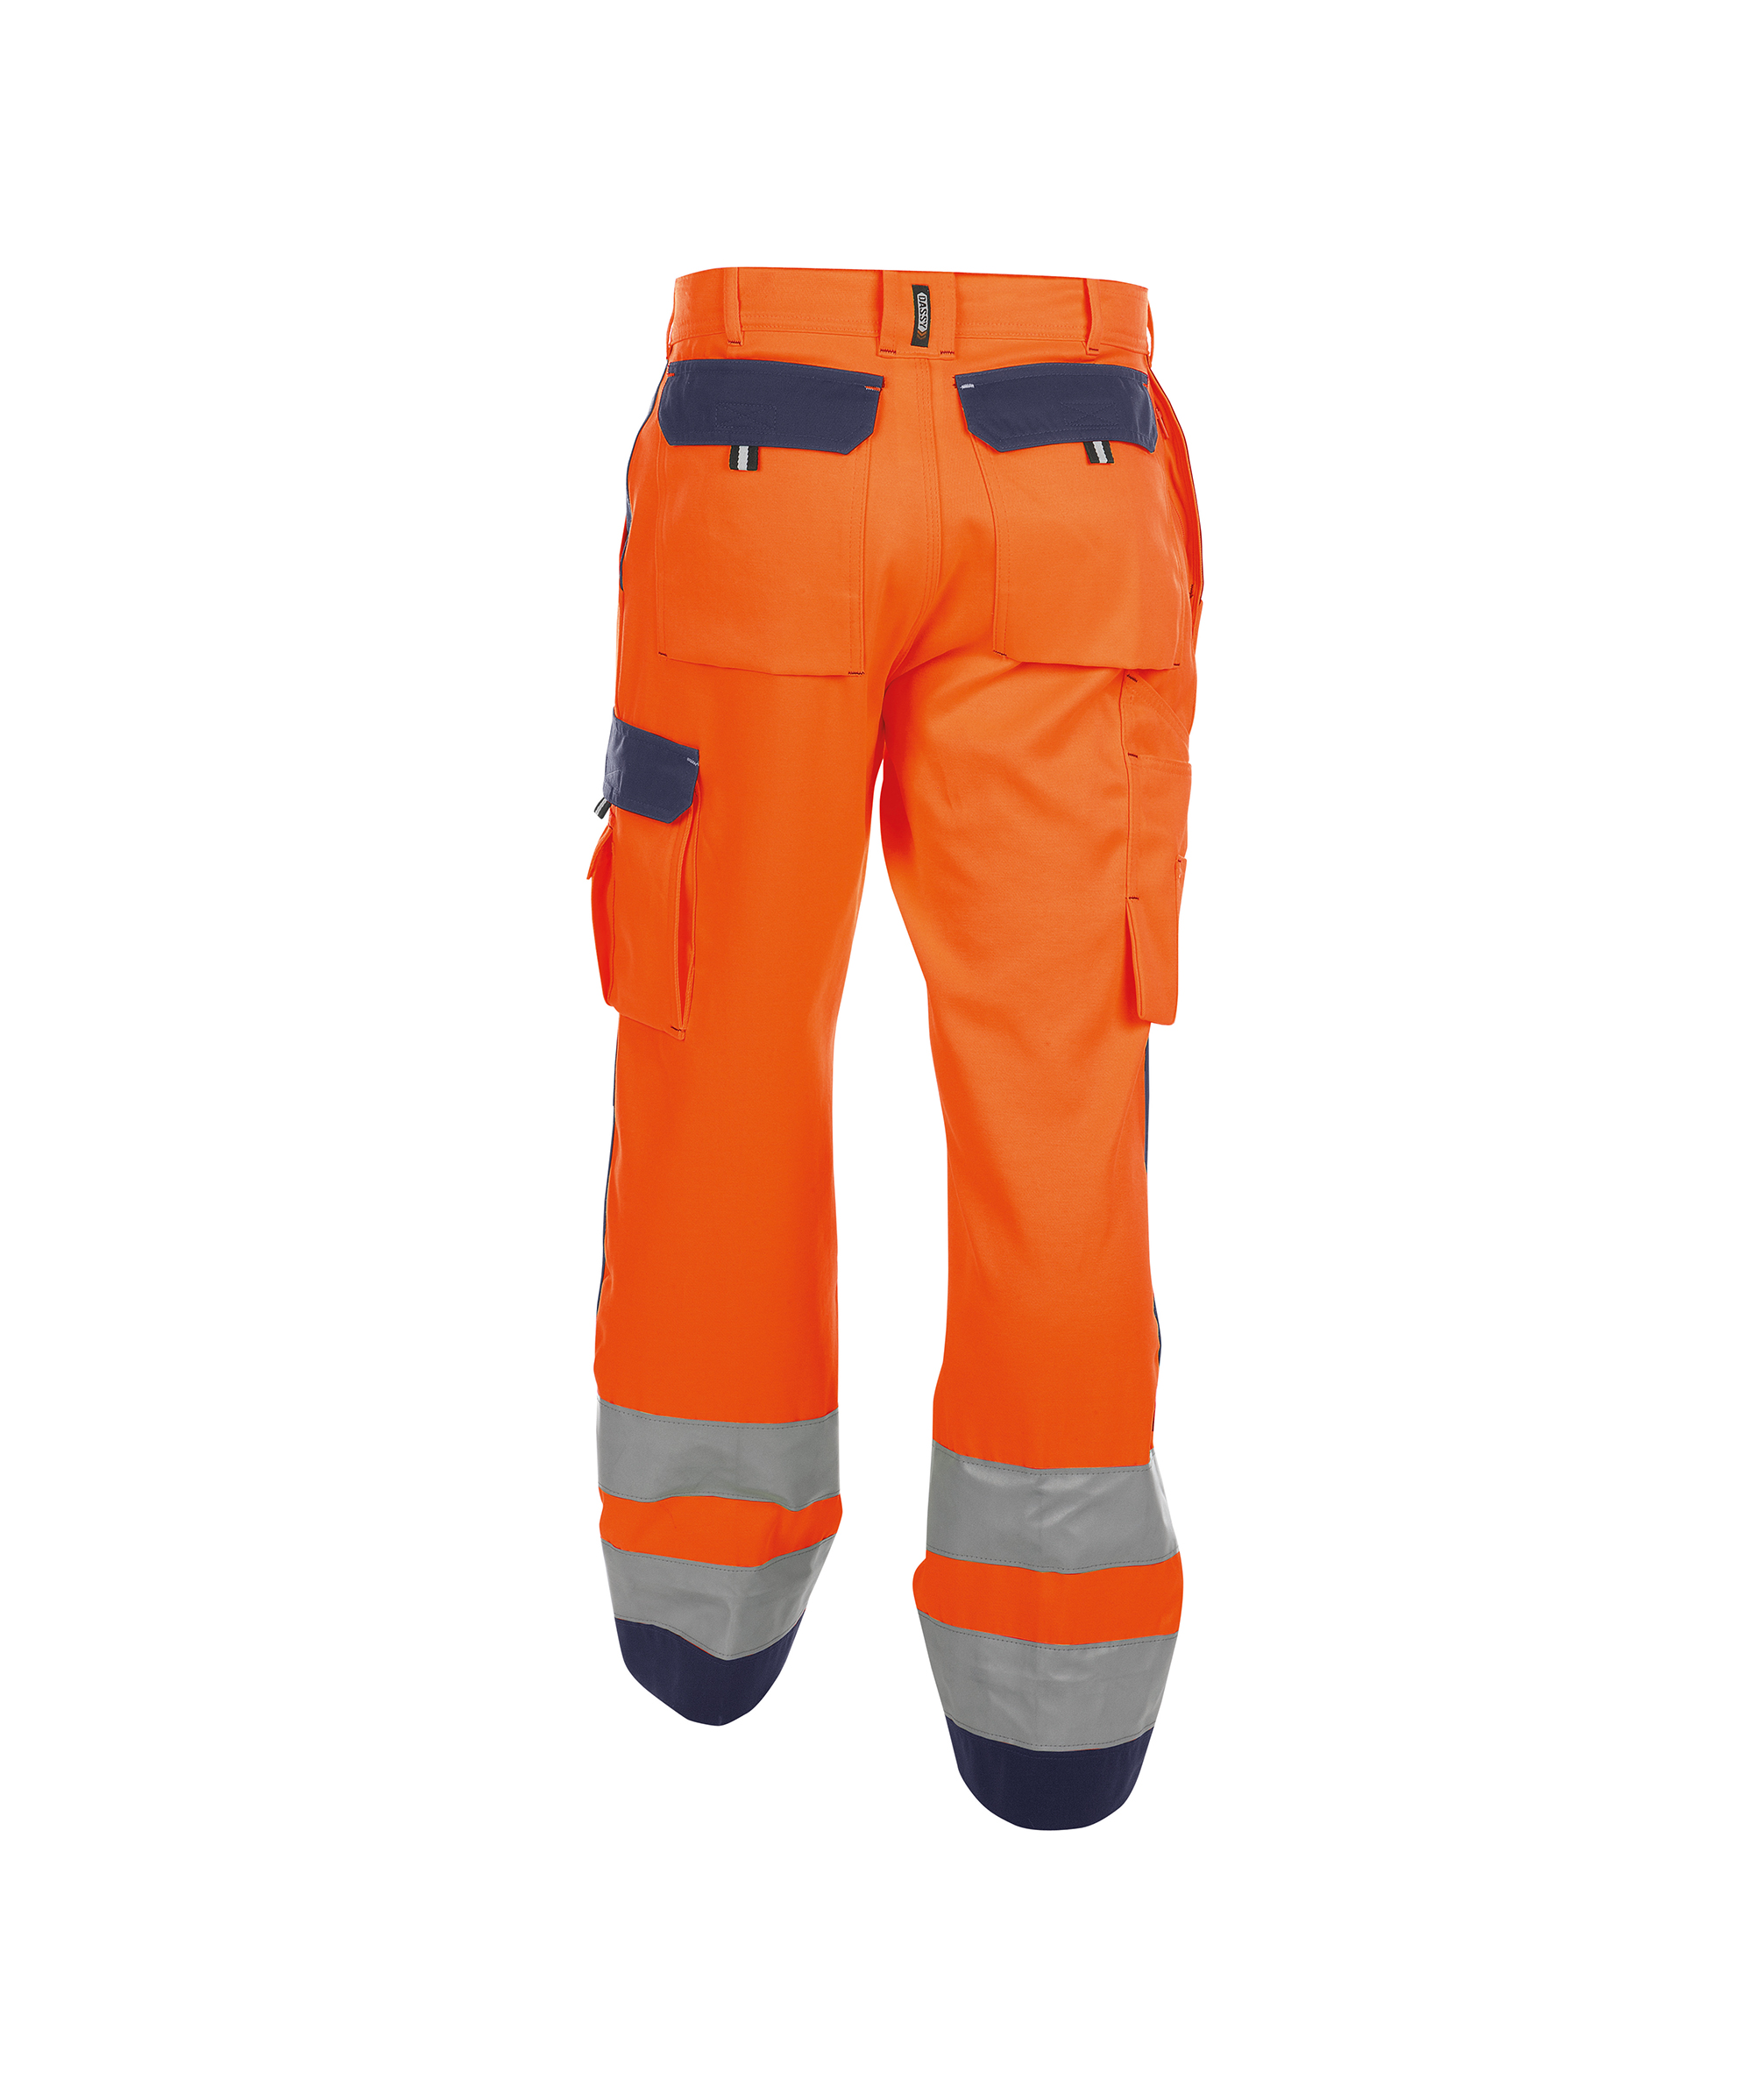 buffalo_high-visibility-work-trousers-with-knee-pockets_fluo-orange-navy_back.jpg